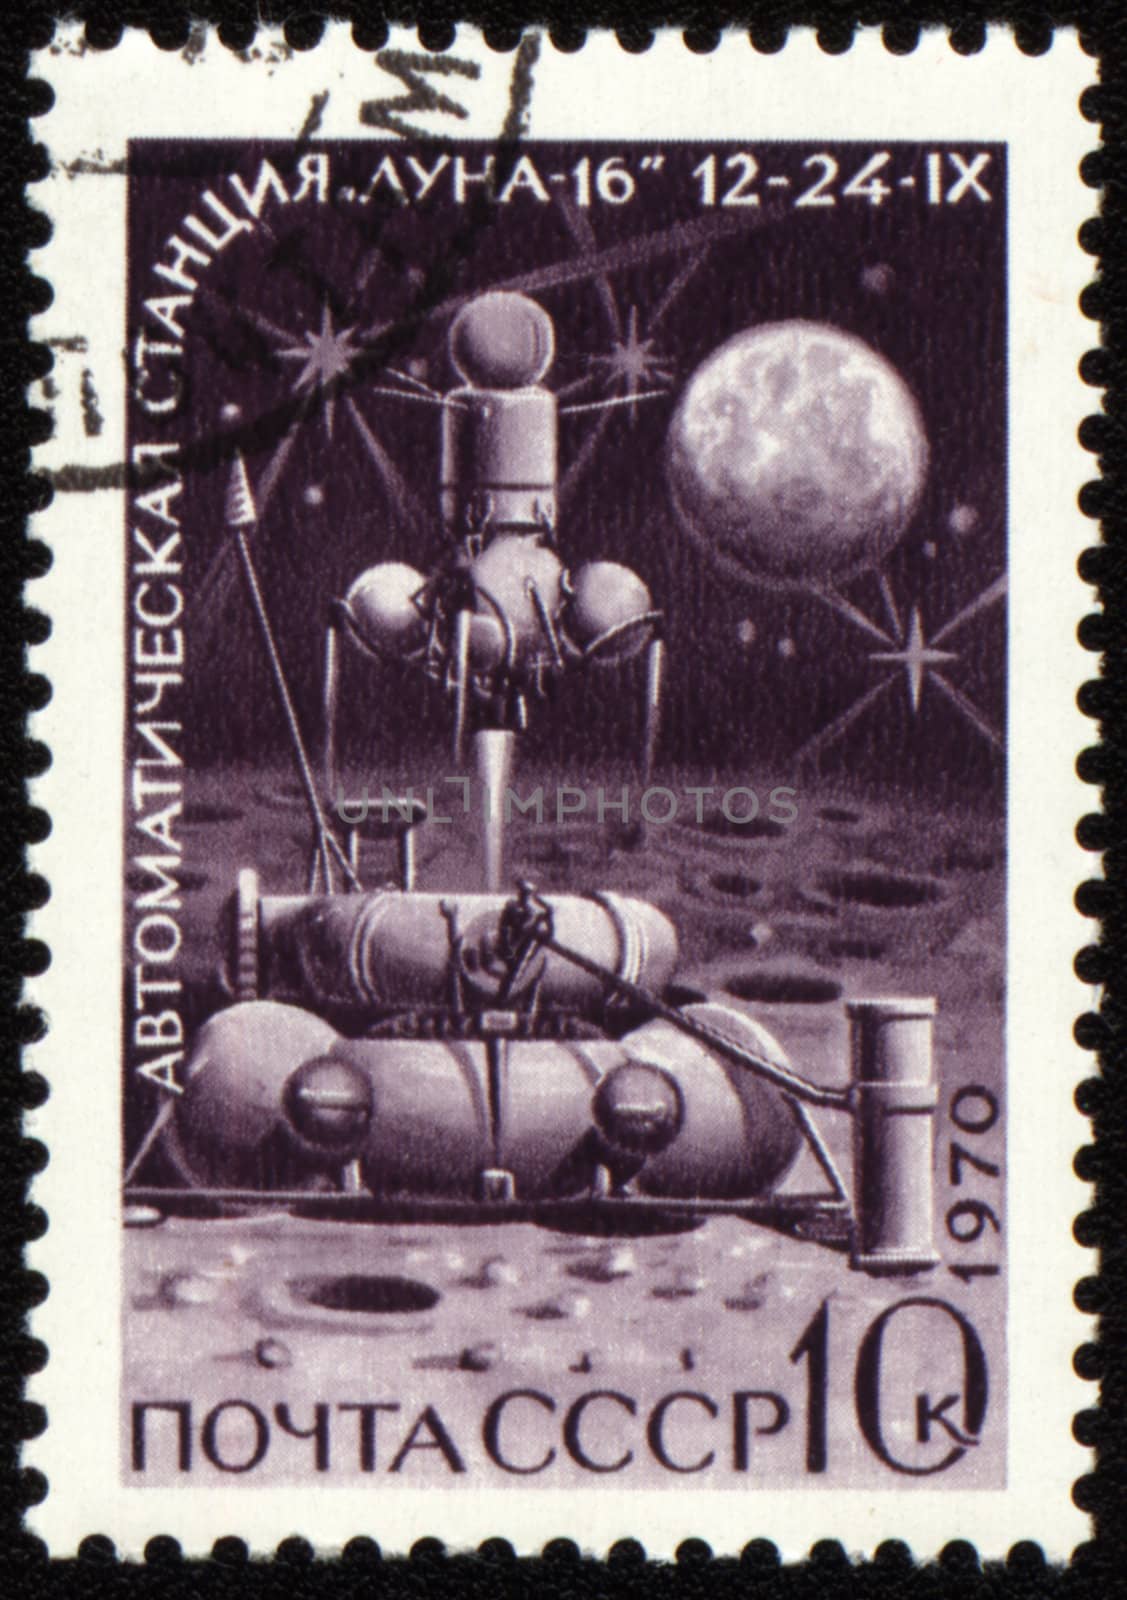 Postage stamp printed in USSR shows soviet automatic station Luna-16, started from Lunar surface, circa 1970